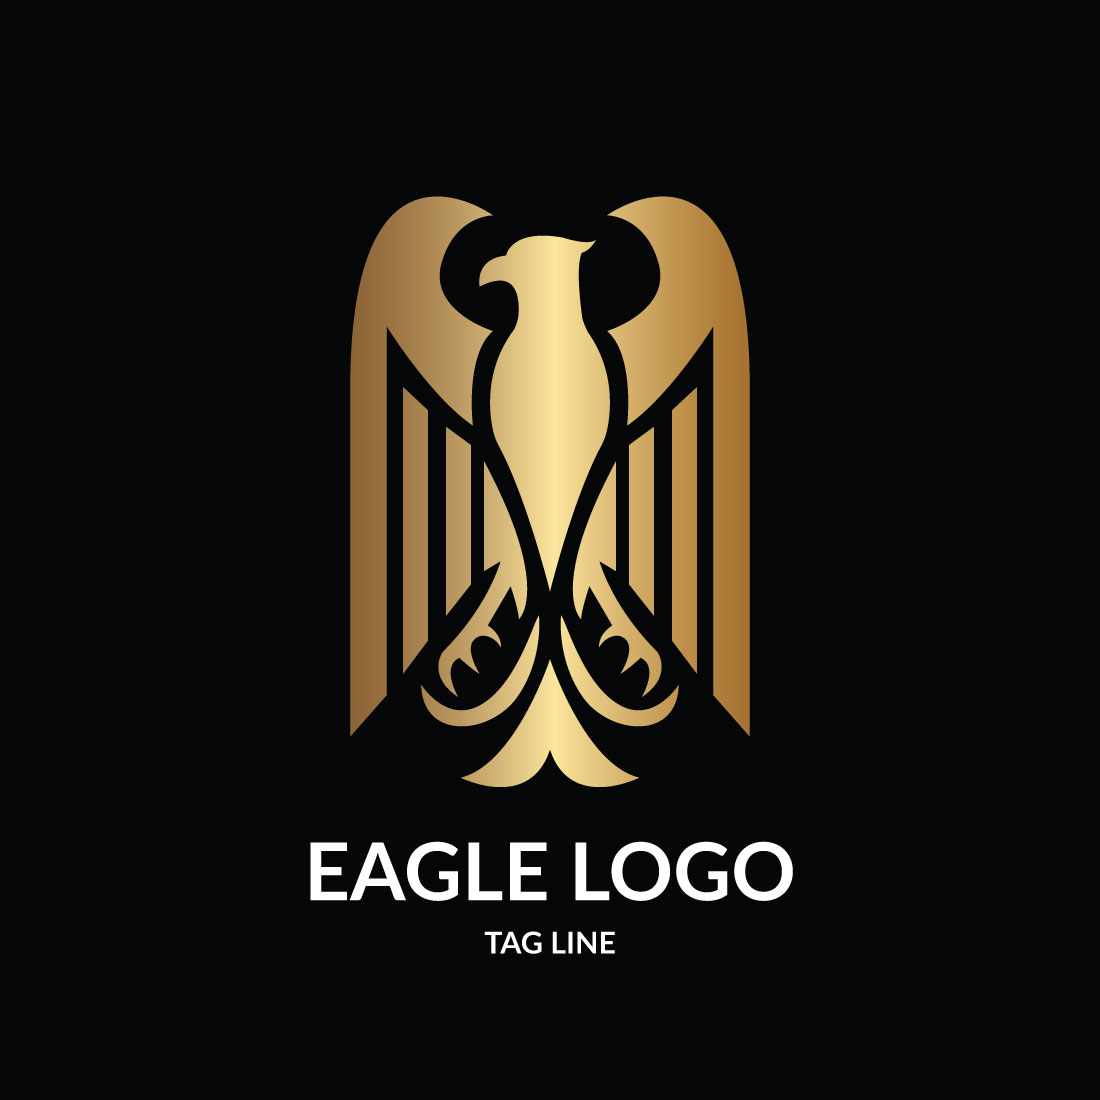 Illustrative Vector Of An American Eagle With A Crown In Monochrome As The  Mascot Vector, Scream, Vector, Symbol PNG and Vector with Transparent  Background for Free Download